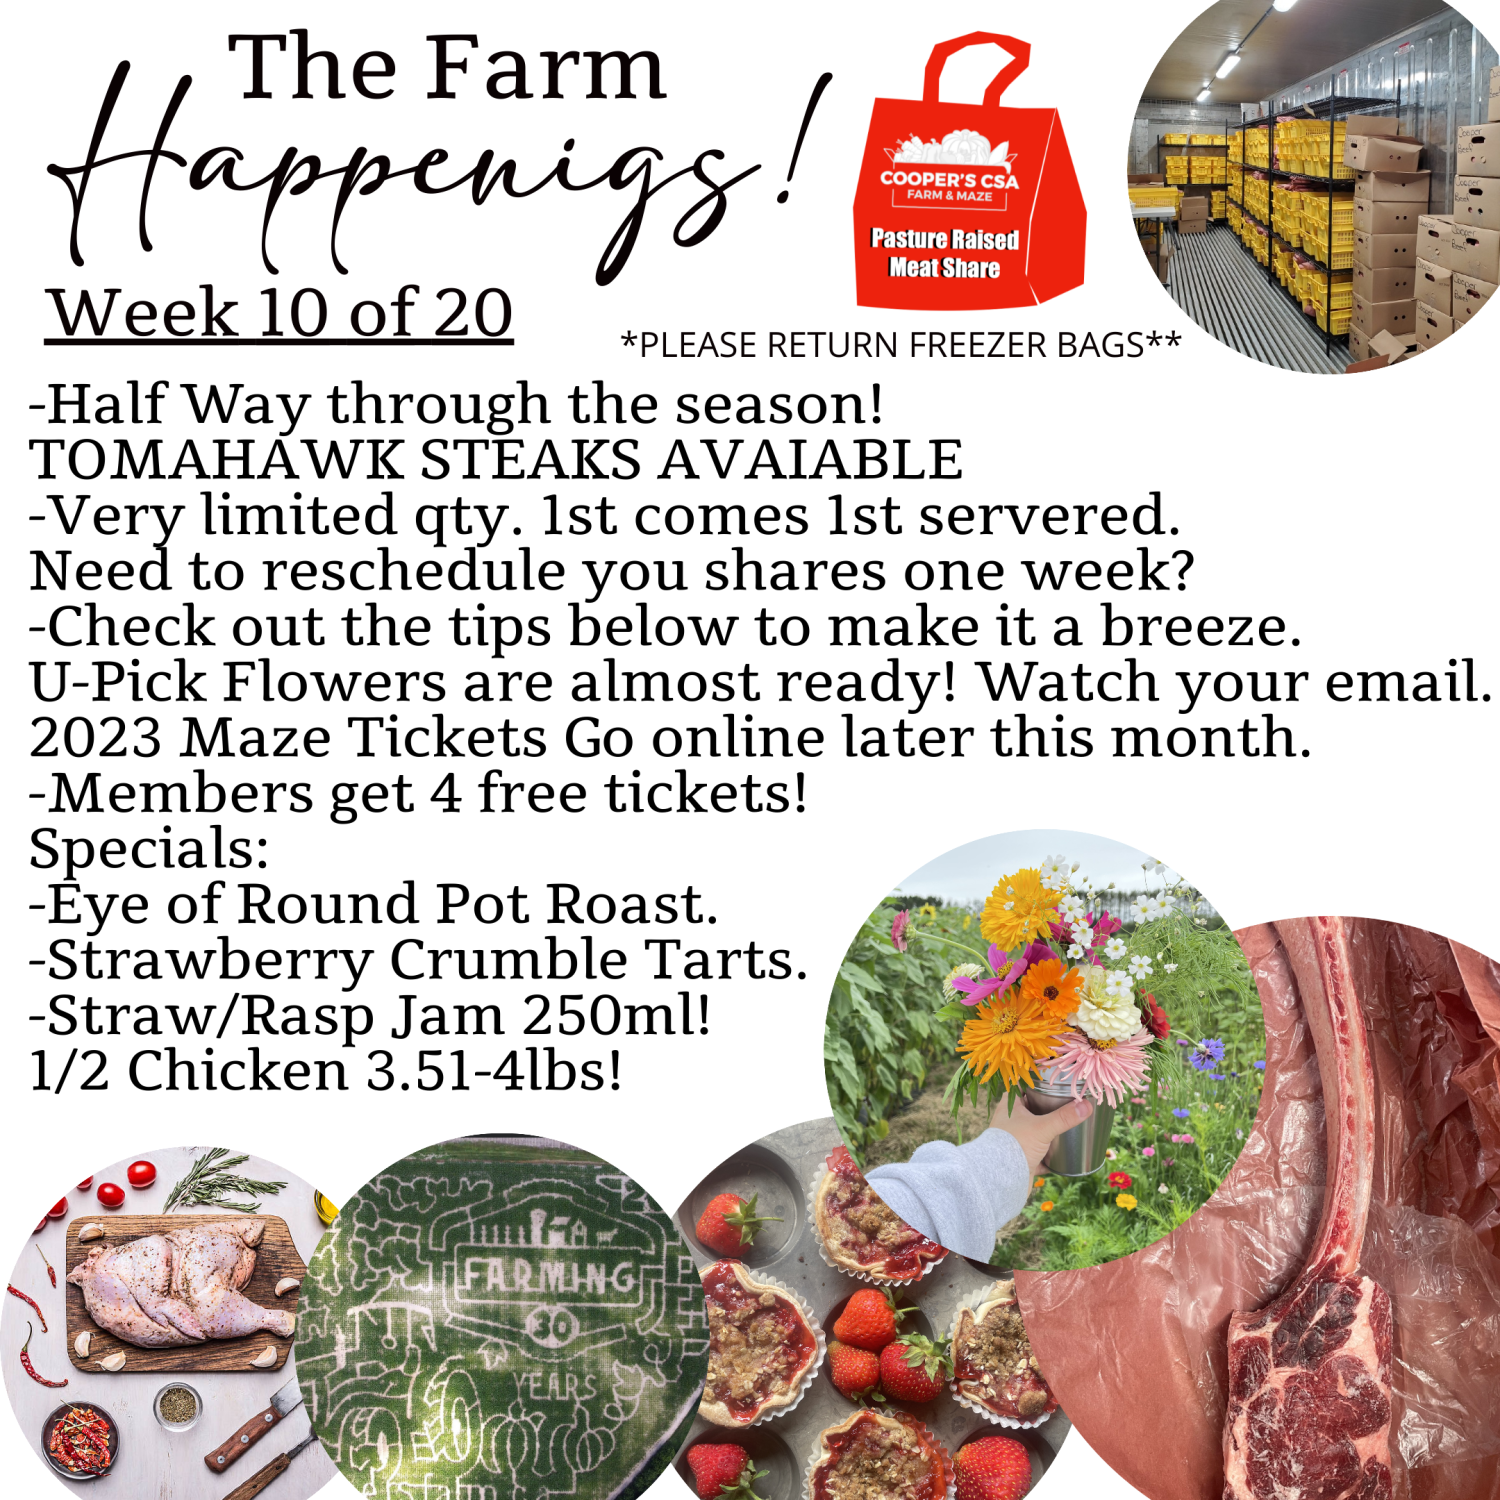 "Pasture Meat Shares"-Coopers CSA Farm Farm Happenings Week 10